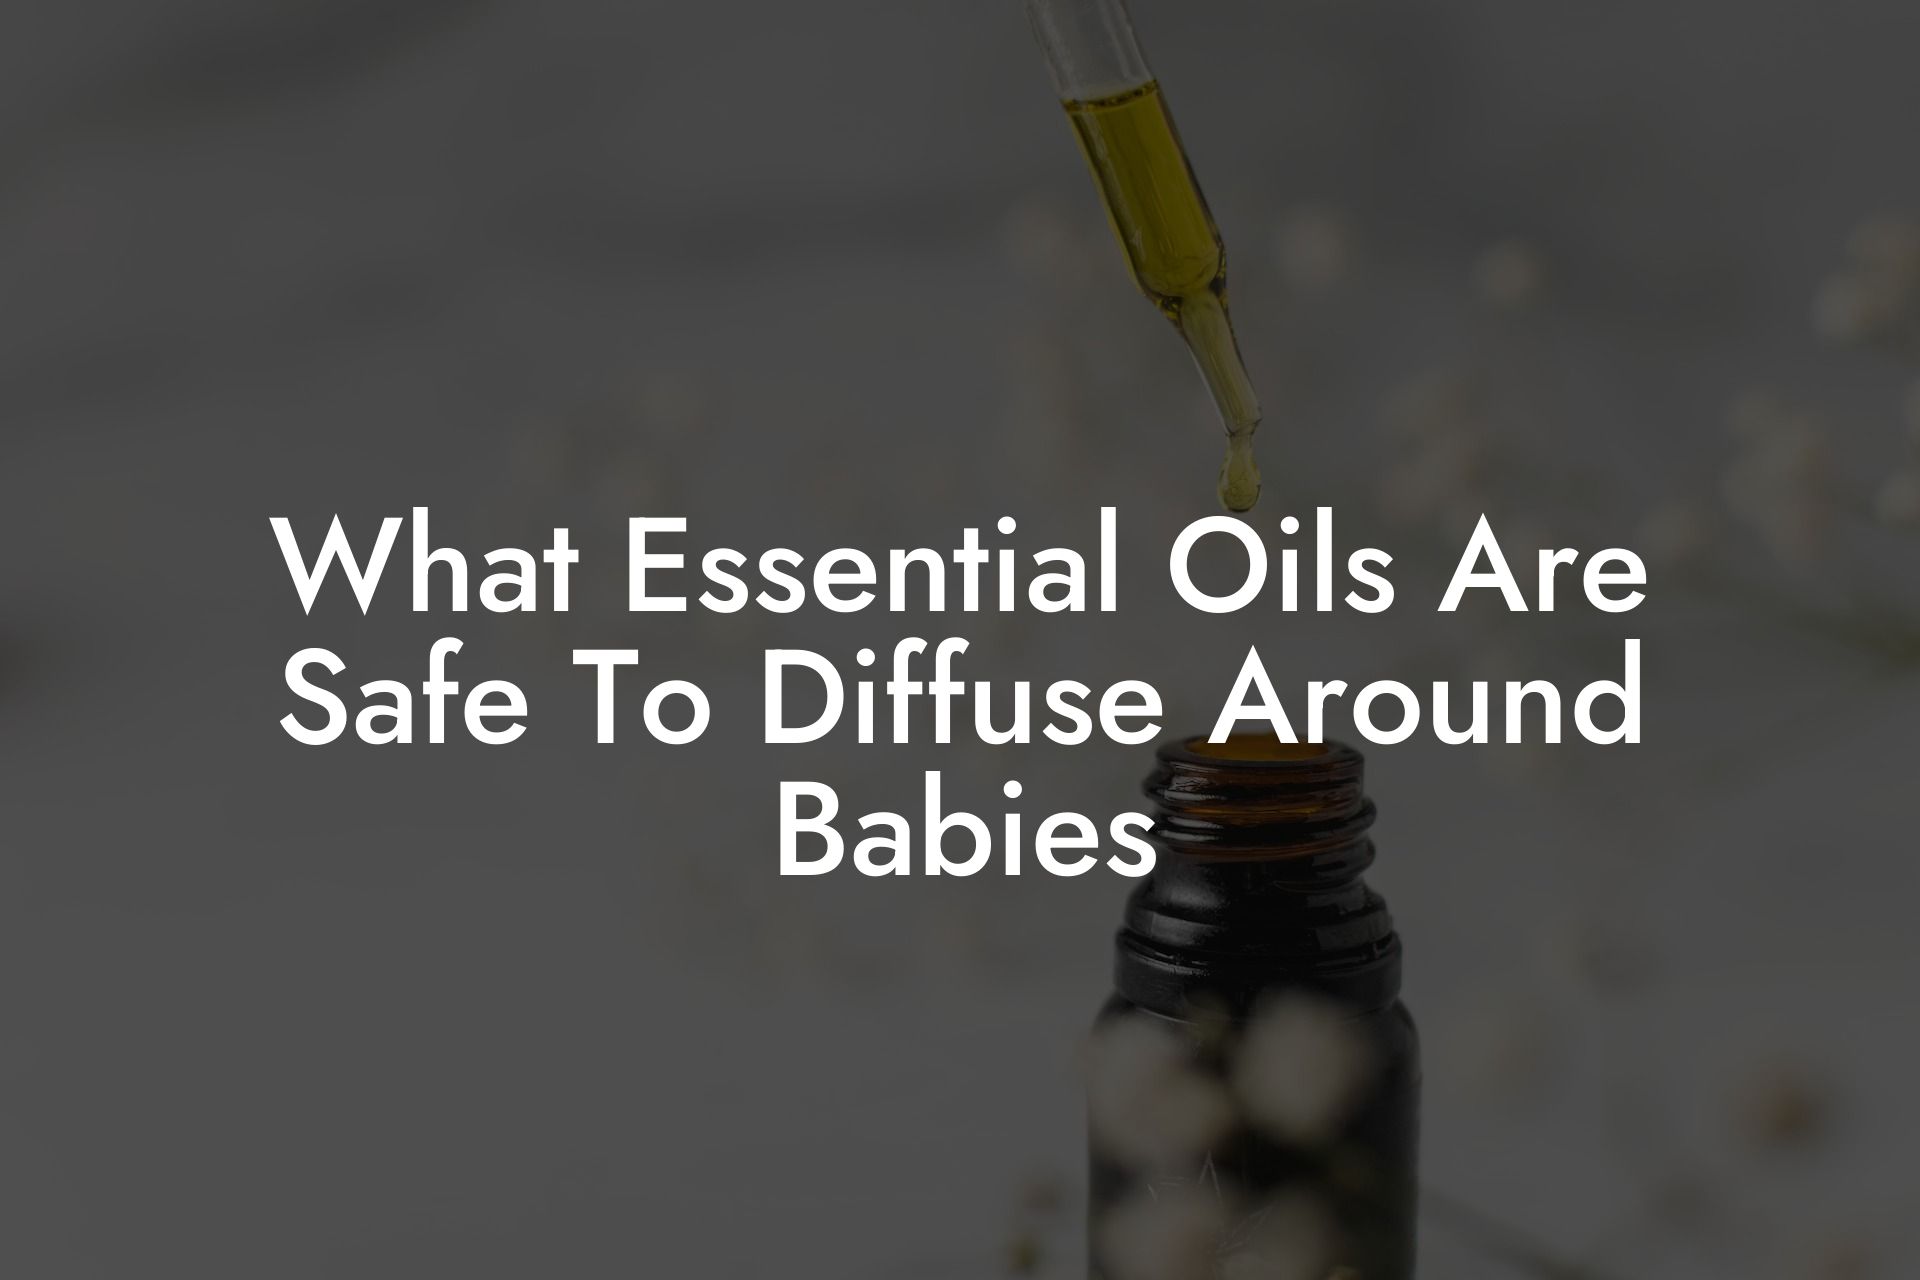 What Essential Oils Are Safe To Diffuse Around Babies